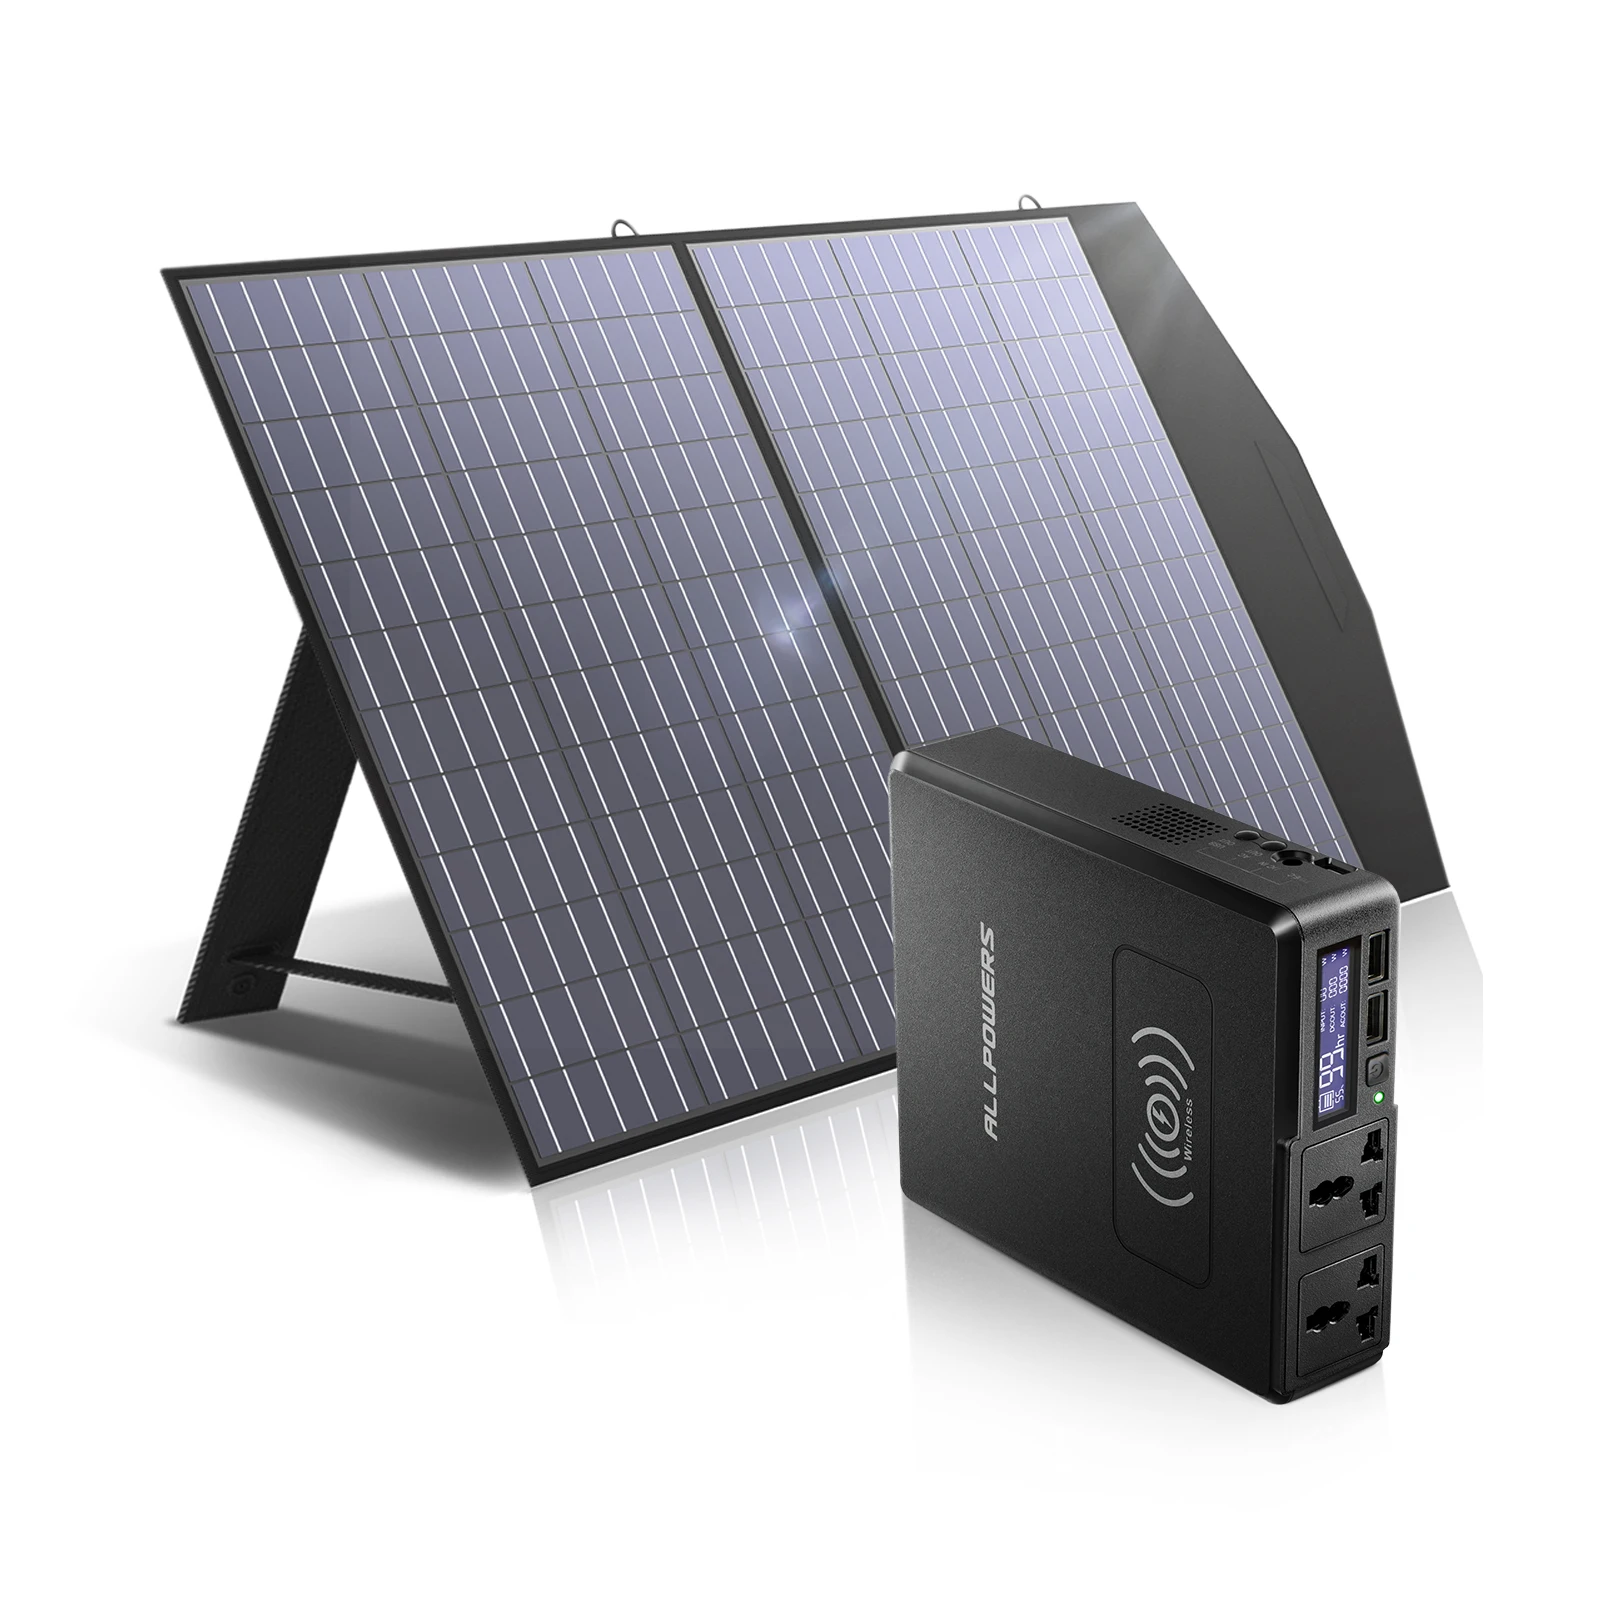 ALLPOWERS Solar Powerbank 41600mAh Home Backup,Outdoor Emergency Power 200W Powerstation Mit Solarpanel 60/100W For Tablet Phone fast charging power bank Power Bank